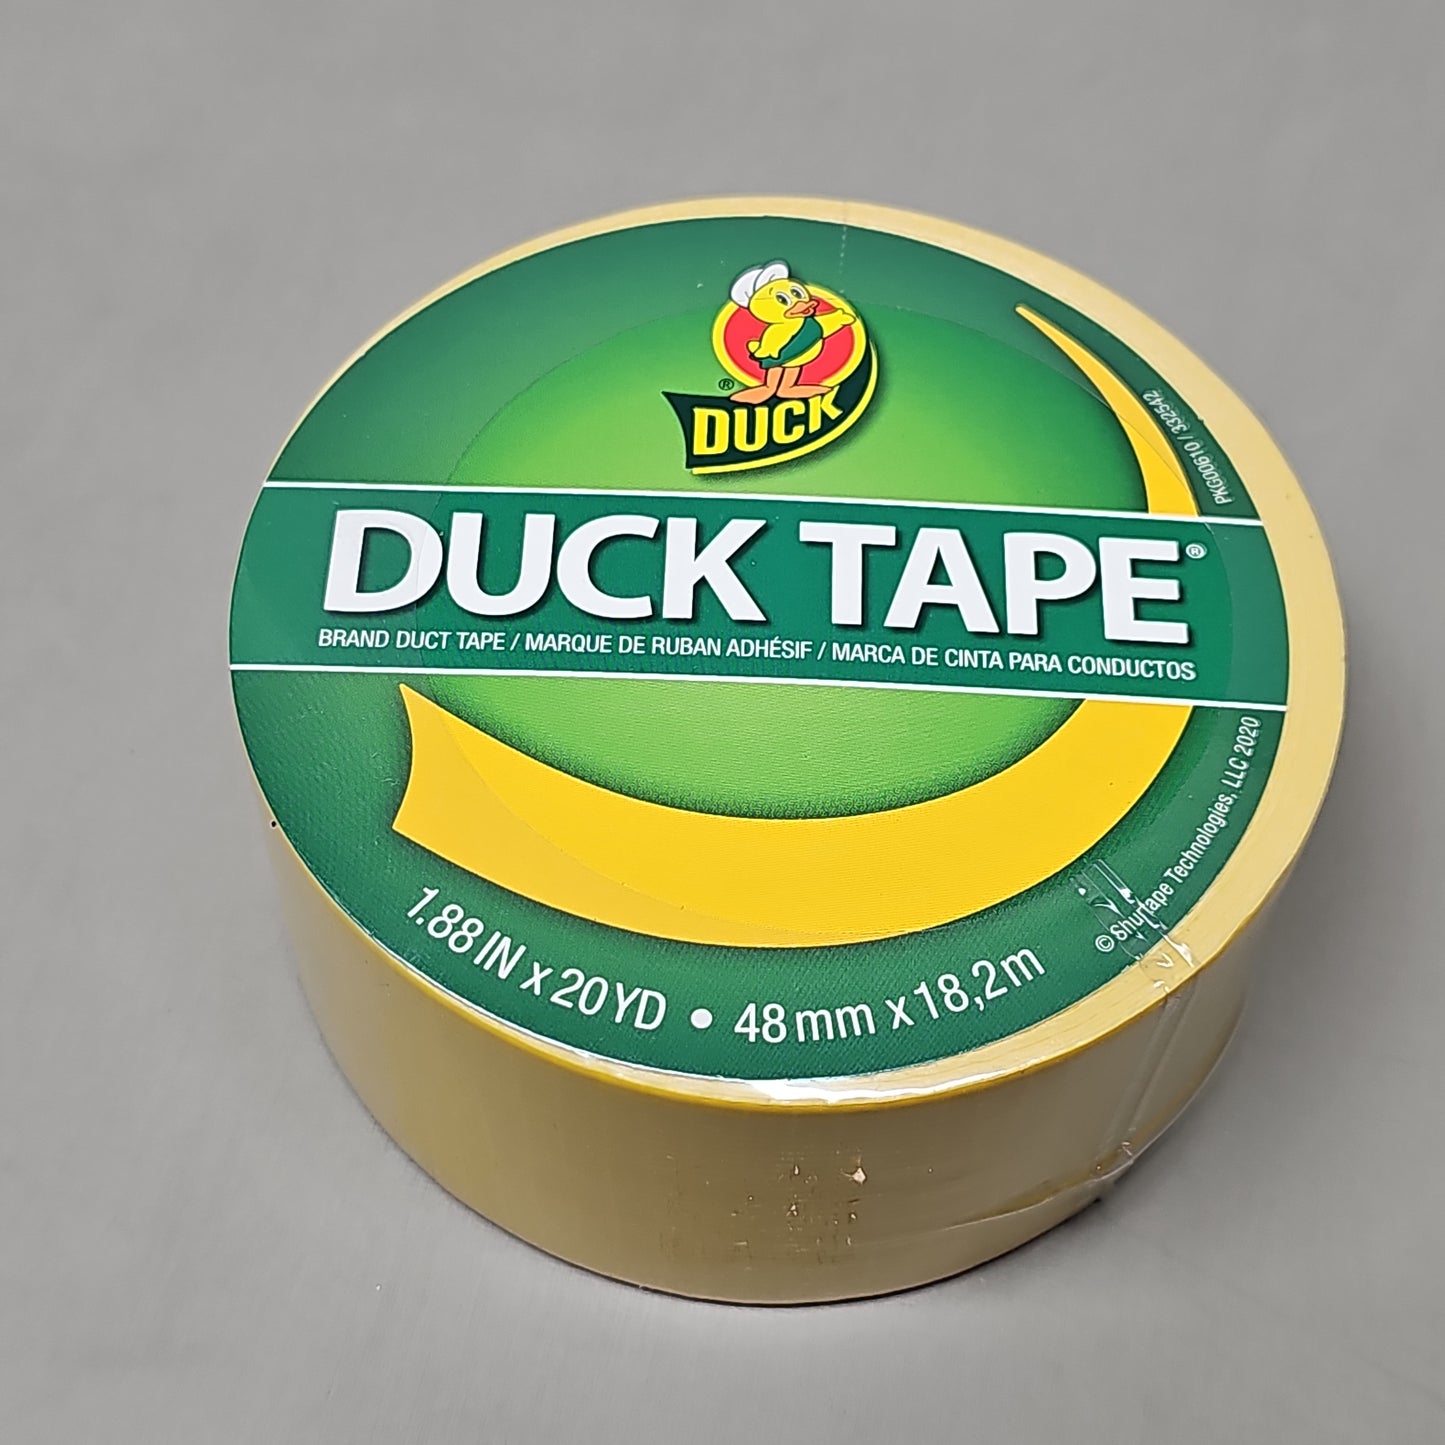 SHURTAPE DUCK TAPE 6 Rolls of Yellow Duct Tape 1.88" X 20 YD 283874